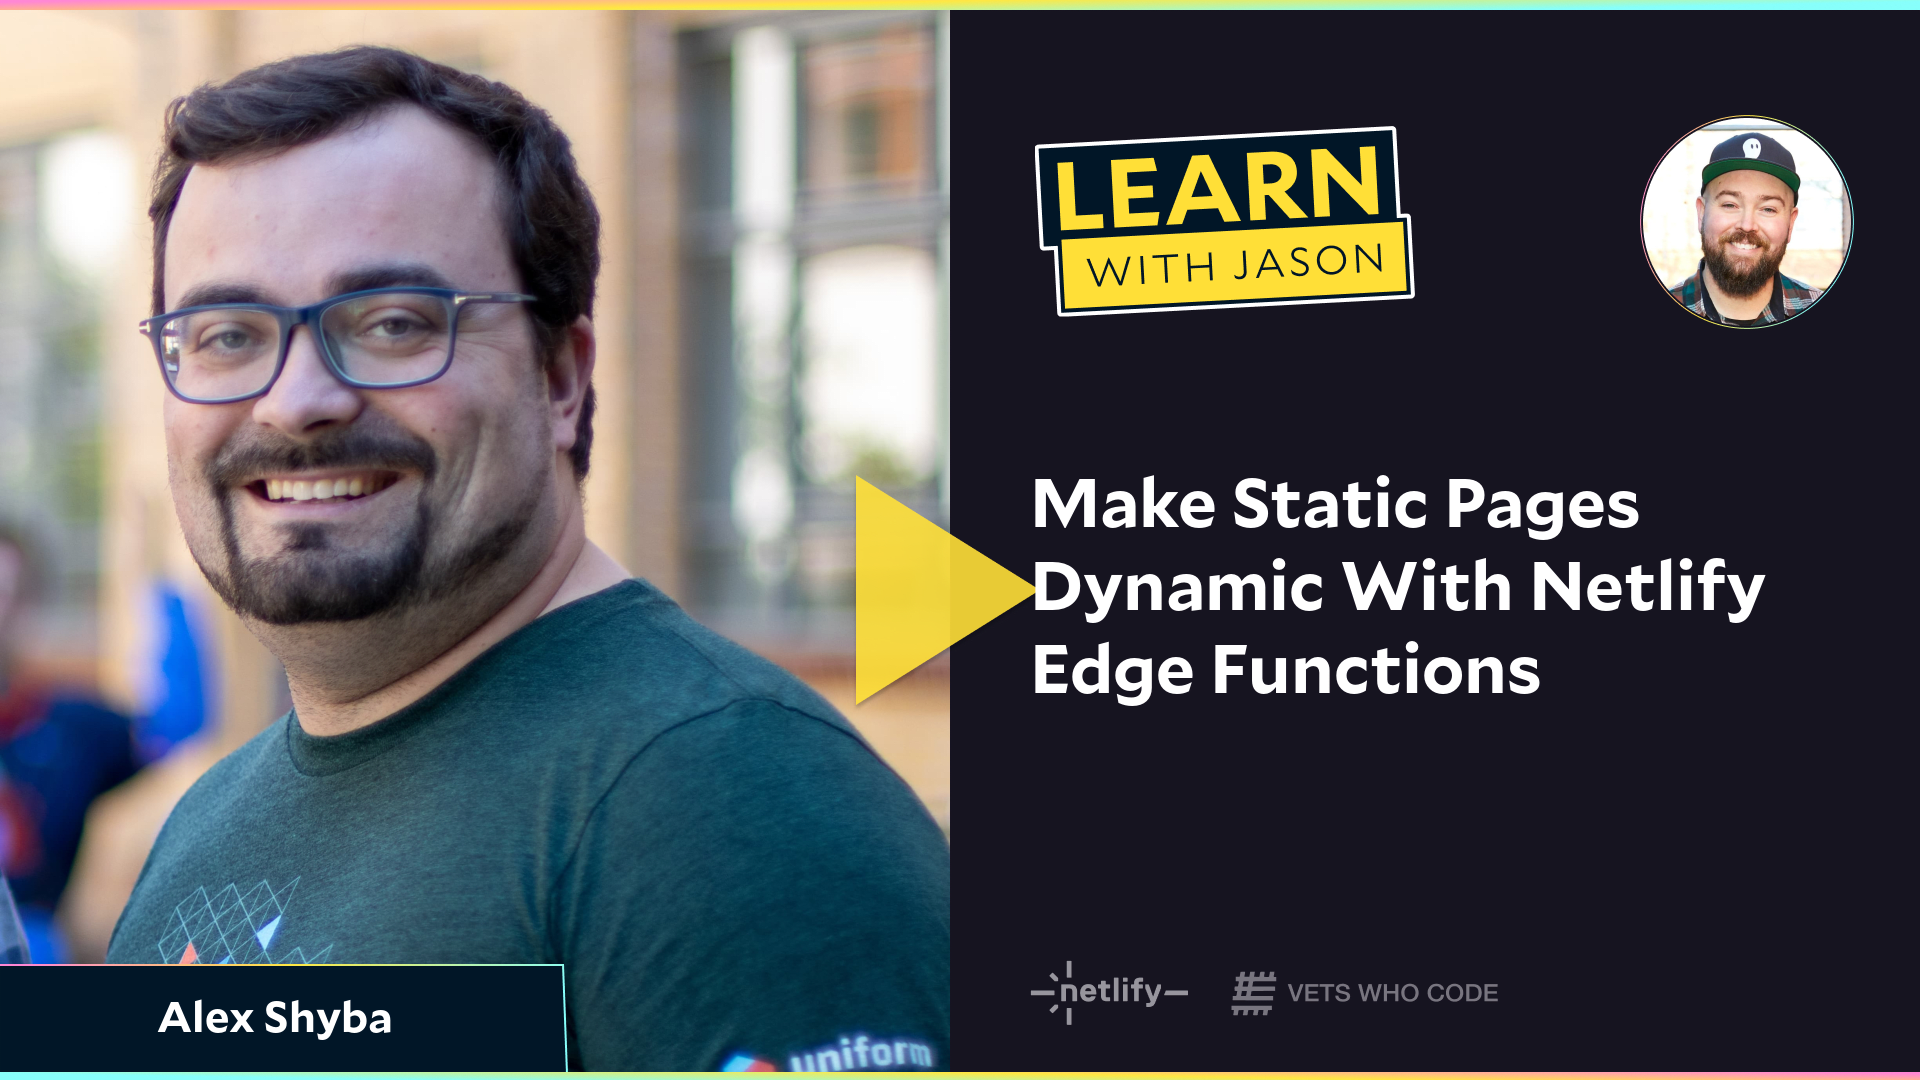 Make Static Pages Dynamic With Netlify Edge Functions (with Alex Shyba)